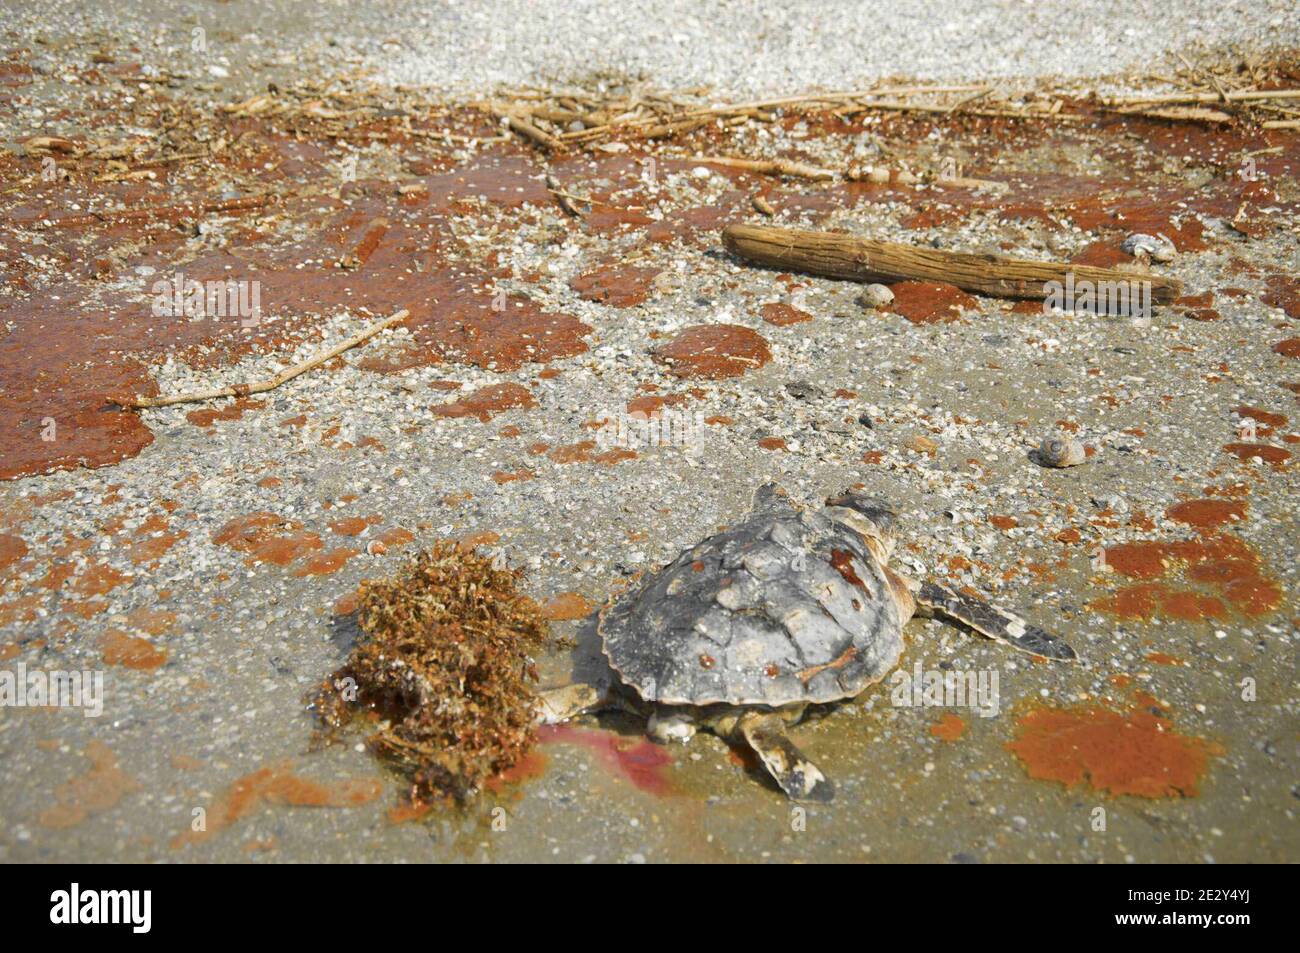 Exclusive Coverage - A dead turtle lays on a crude oil May 22, 2010 in GrandTerre Isle, Louisiana. BP officials indicated on Saturday that the latest attempt to plug the source of the worst oil spill in U.S. history still hasn't been successful. Photo by Richard Shephard /ABACAPRESS.COM Please agree fees prior to usage. Stock Photo